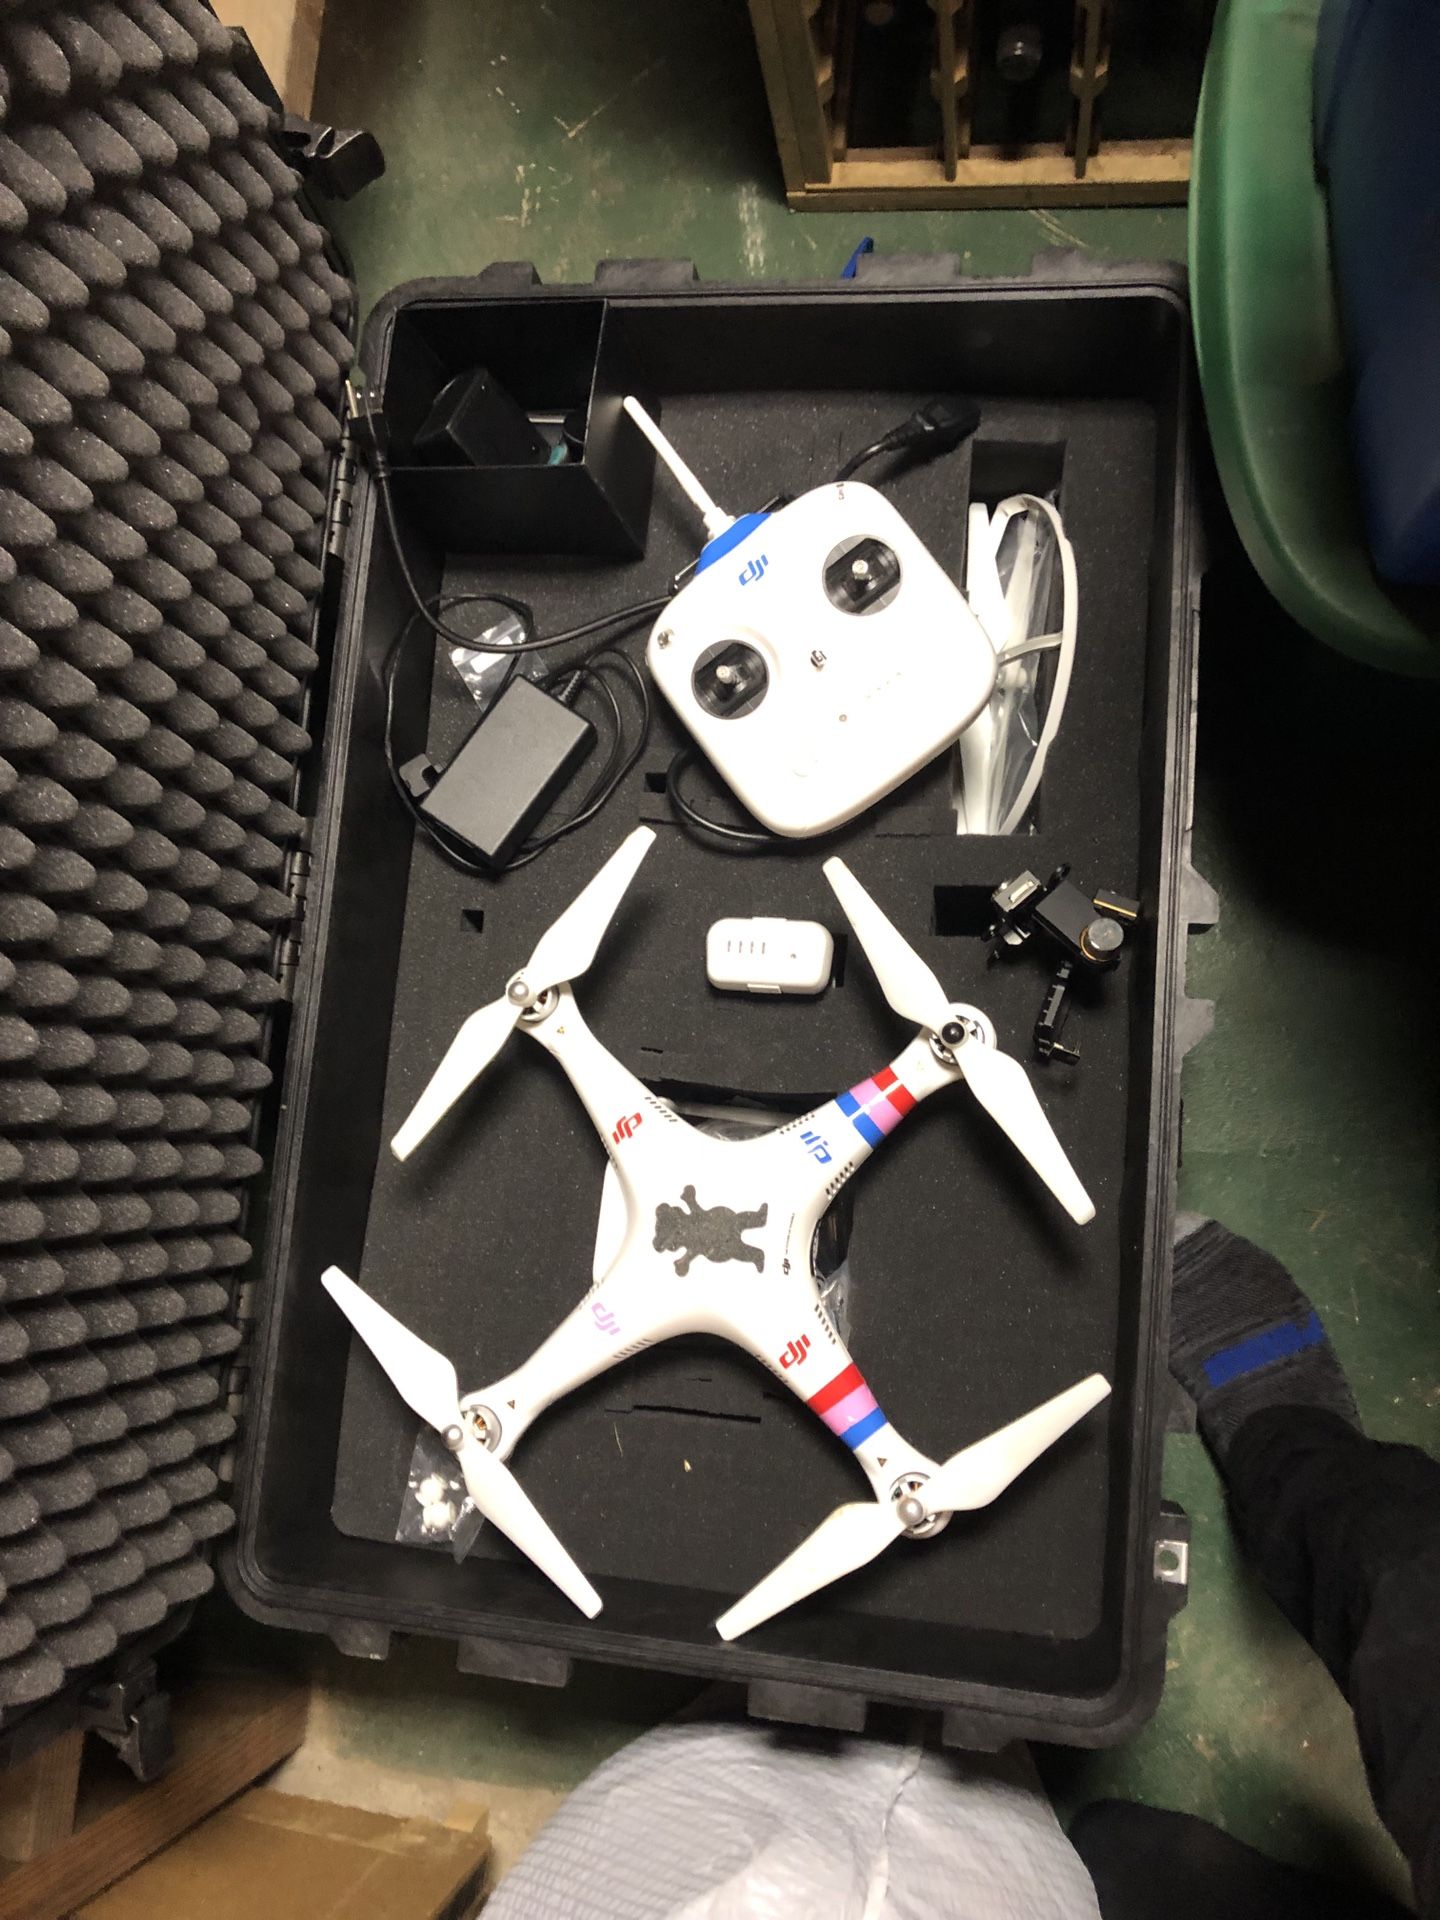 Phantom 2 DJI drone comes with Gimbal and Pelican case